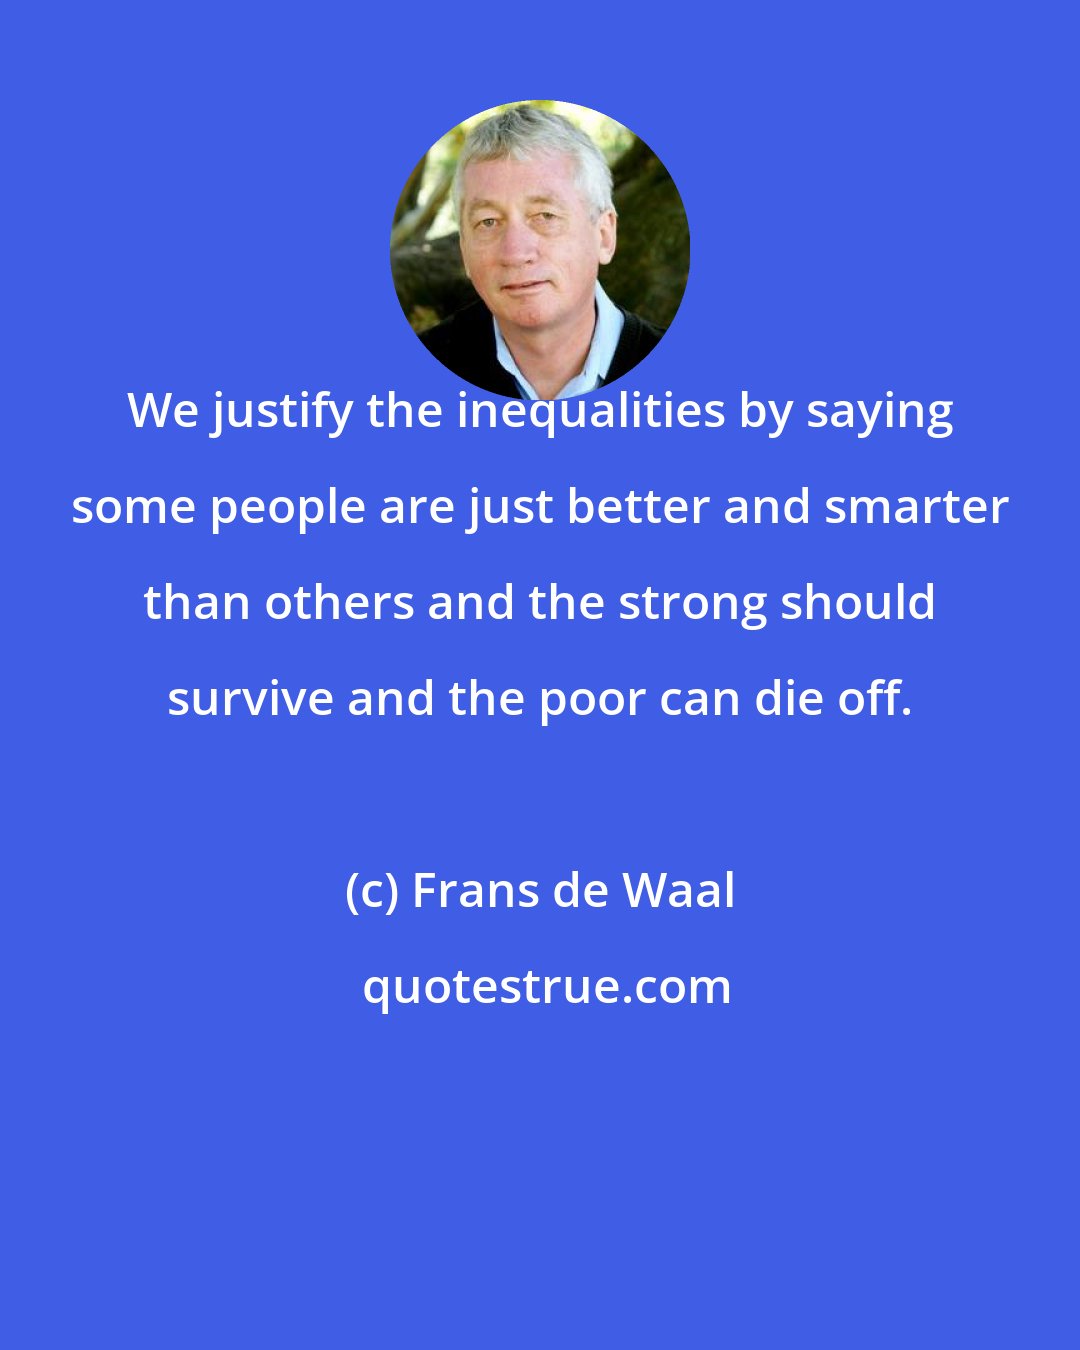 Frans de Waal: We justify the inequalities by saying some people are just better and smarter than others and the strong should survive and the poor can die off.